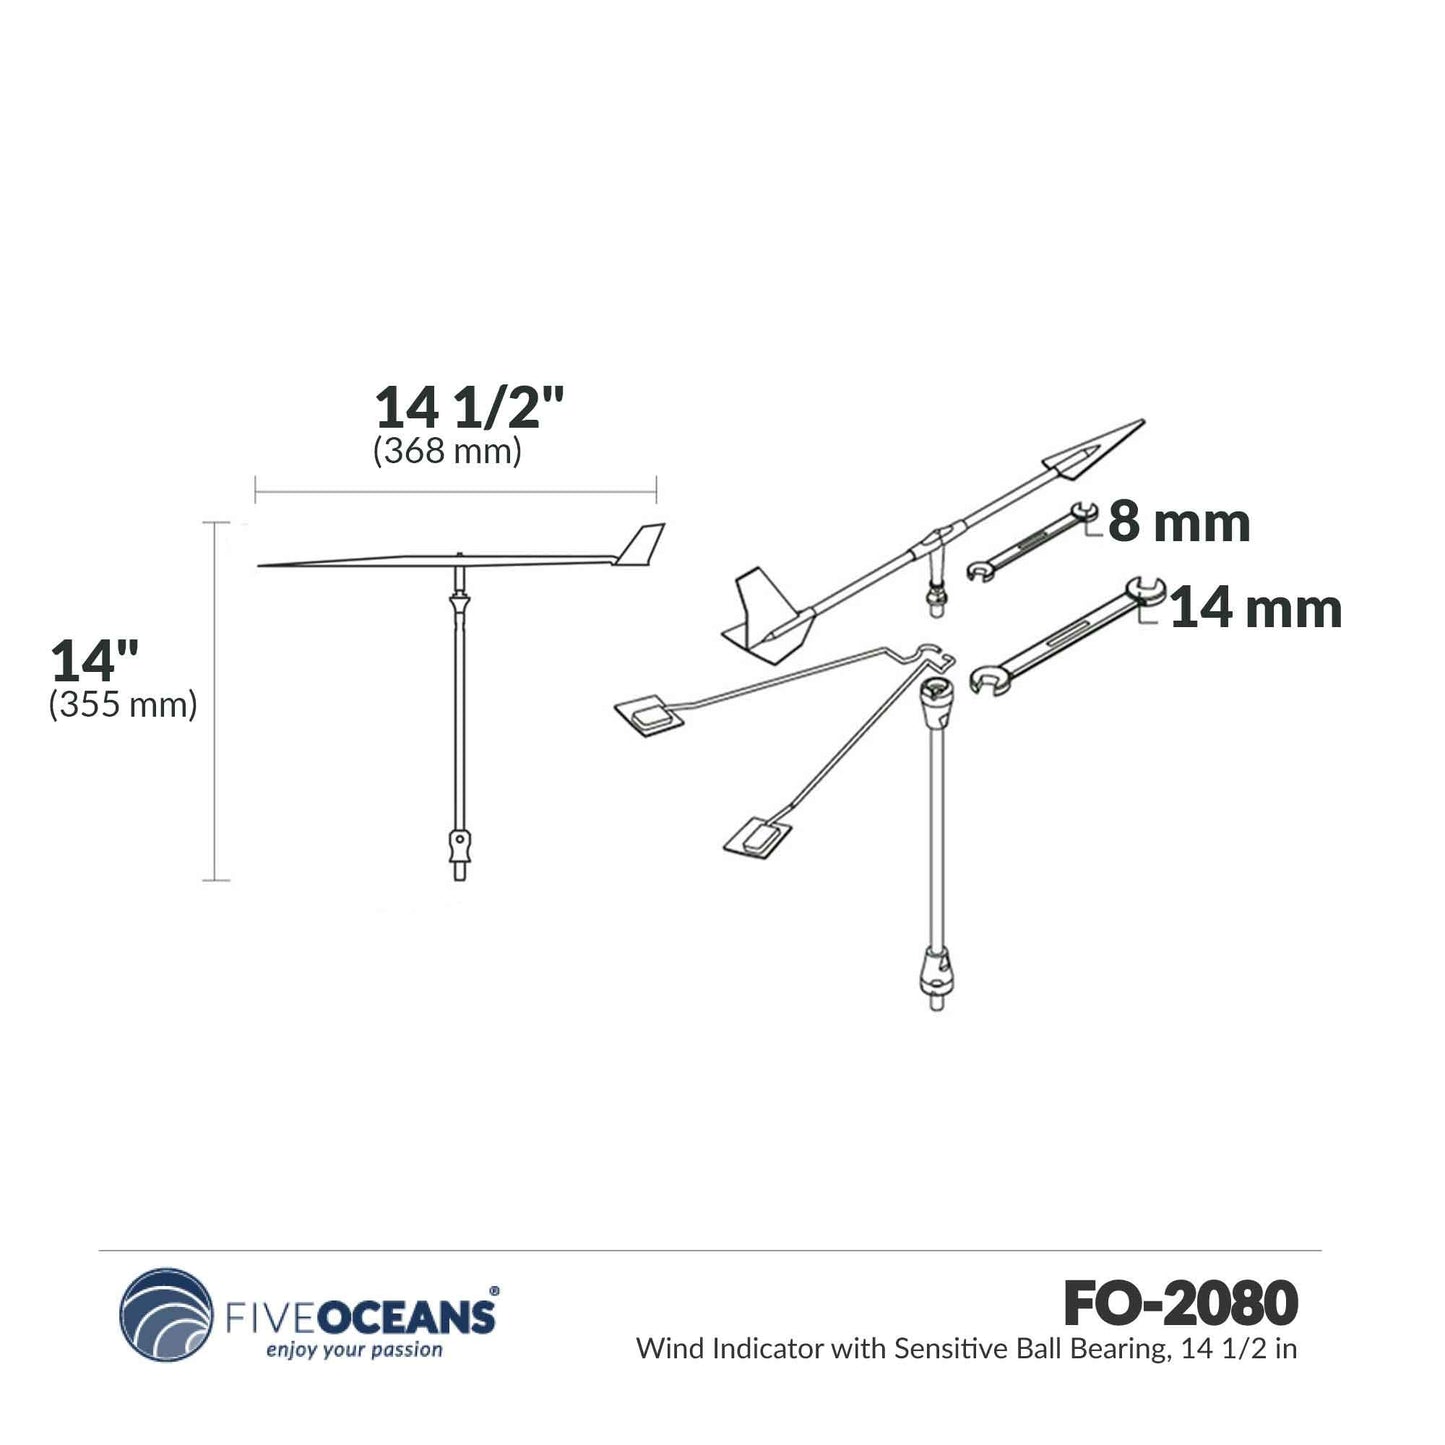 Five Oceans Wind Indicator with Sensitive Ball Bearing, 14-1/2 inches